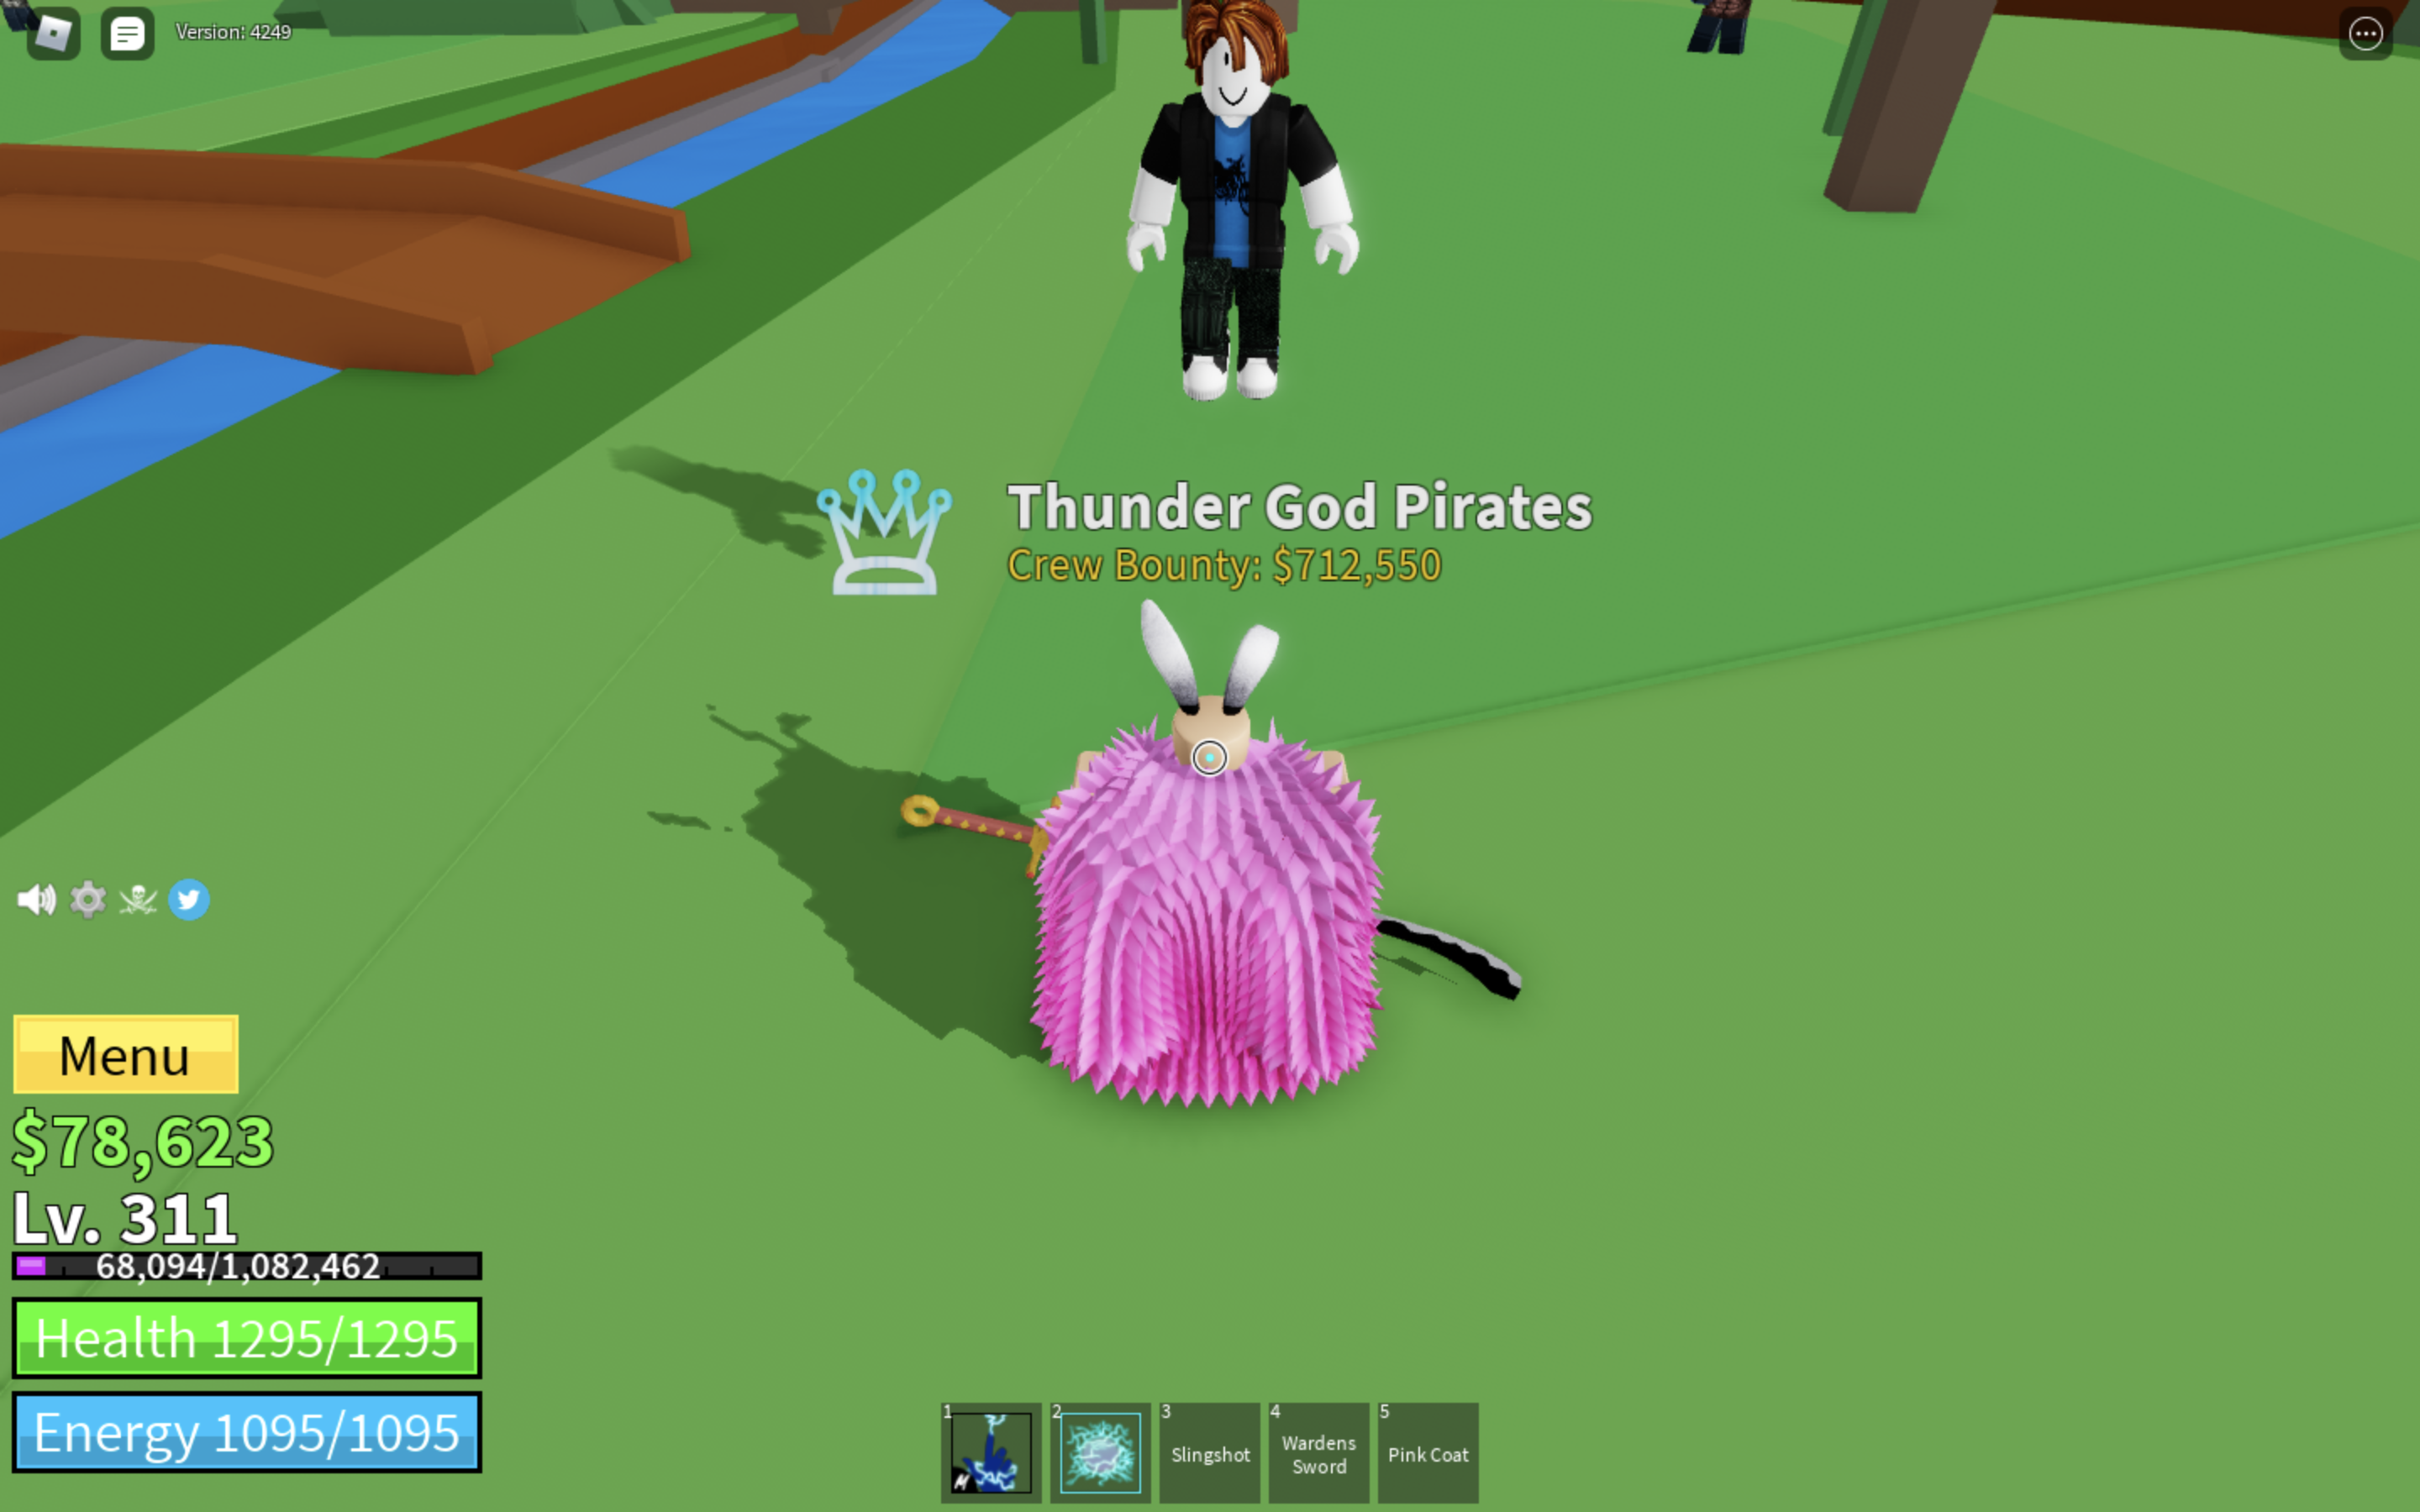 Any offers for string and portal? : r/bloxfruits